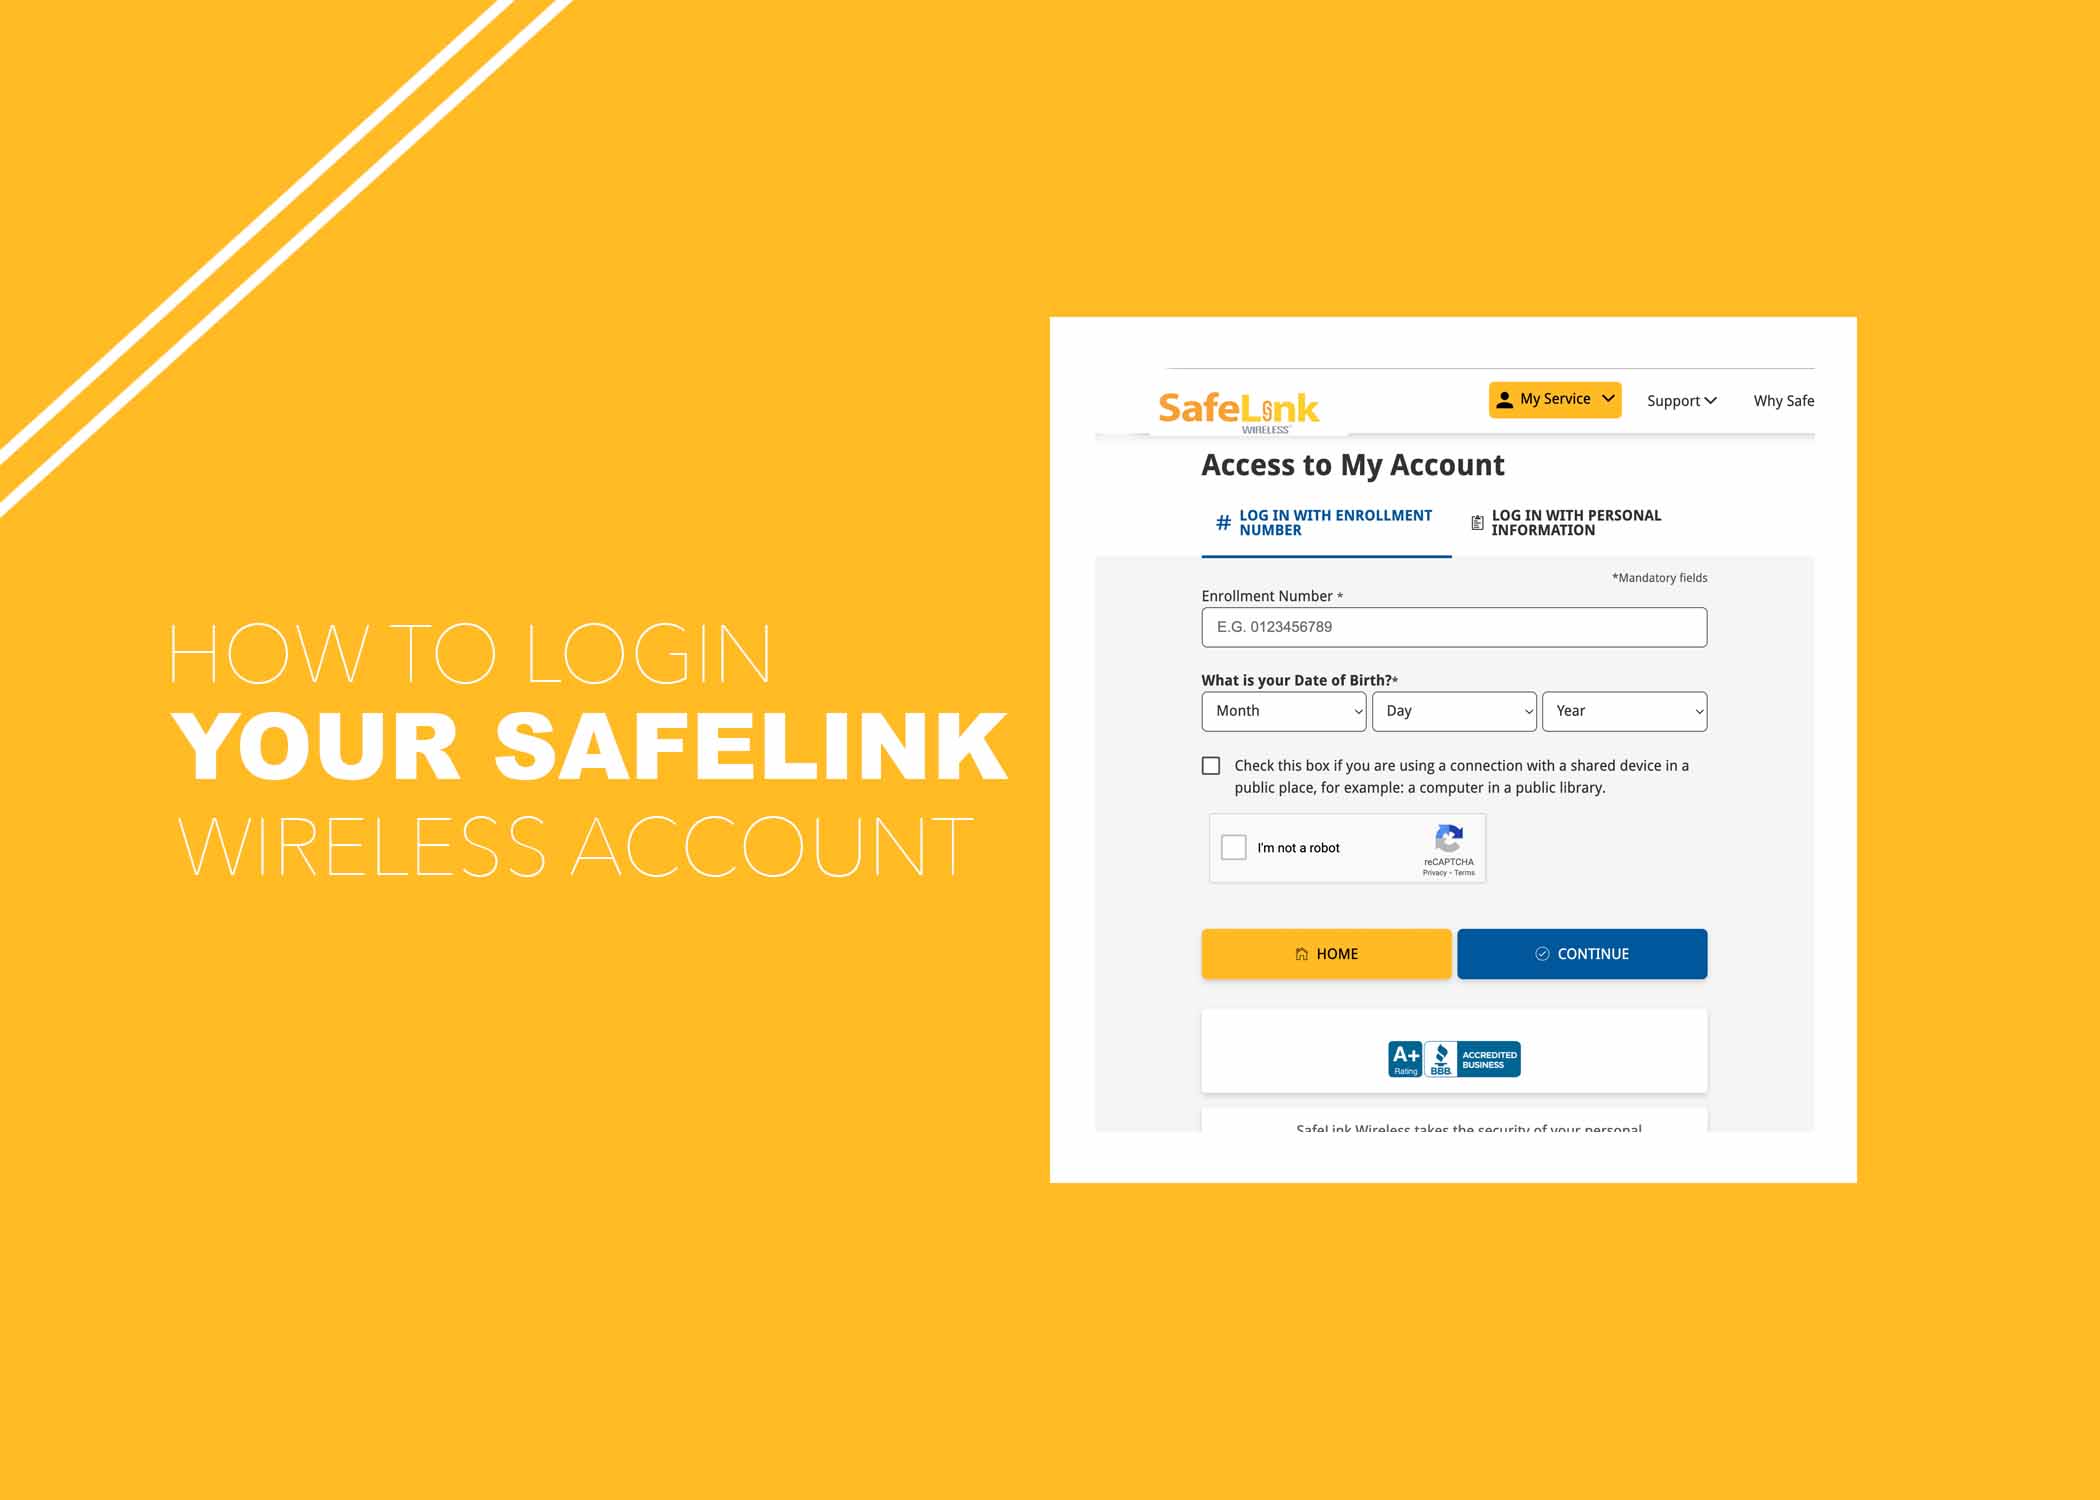 How to Login Your SafeLink Wireless Account